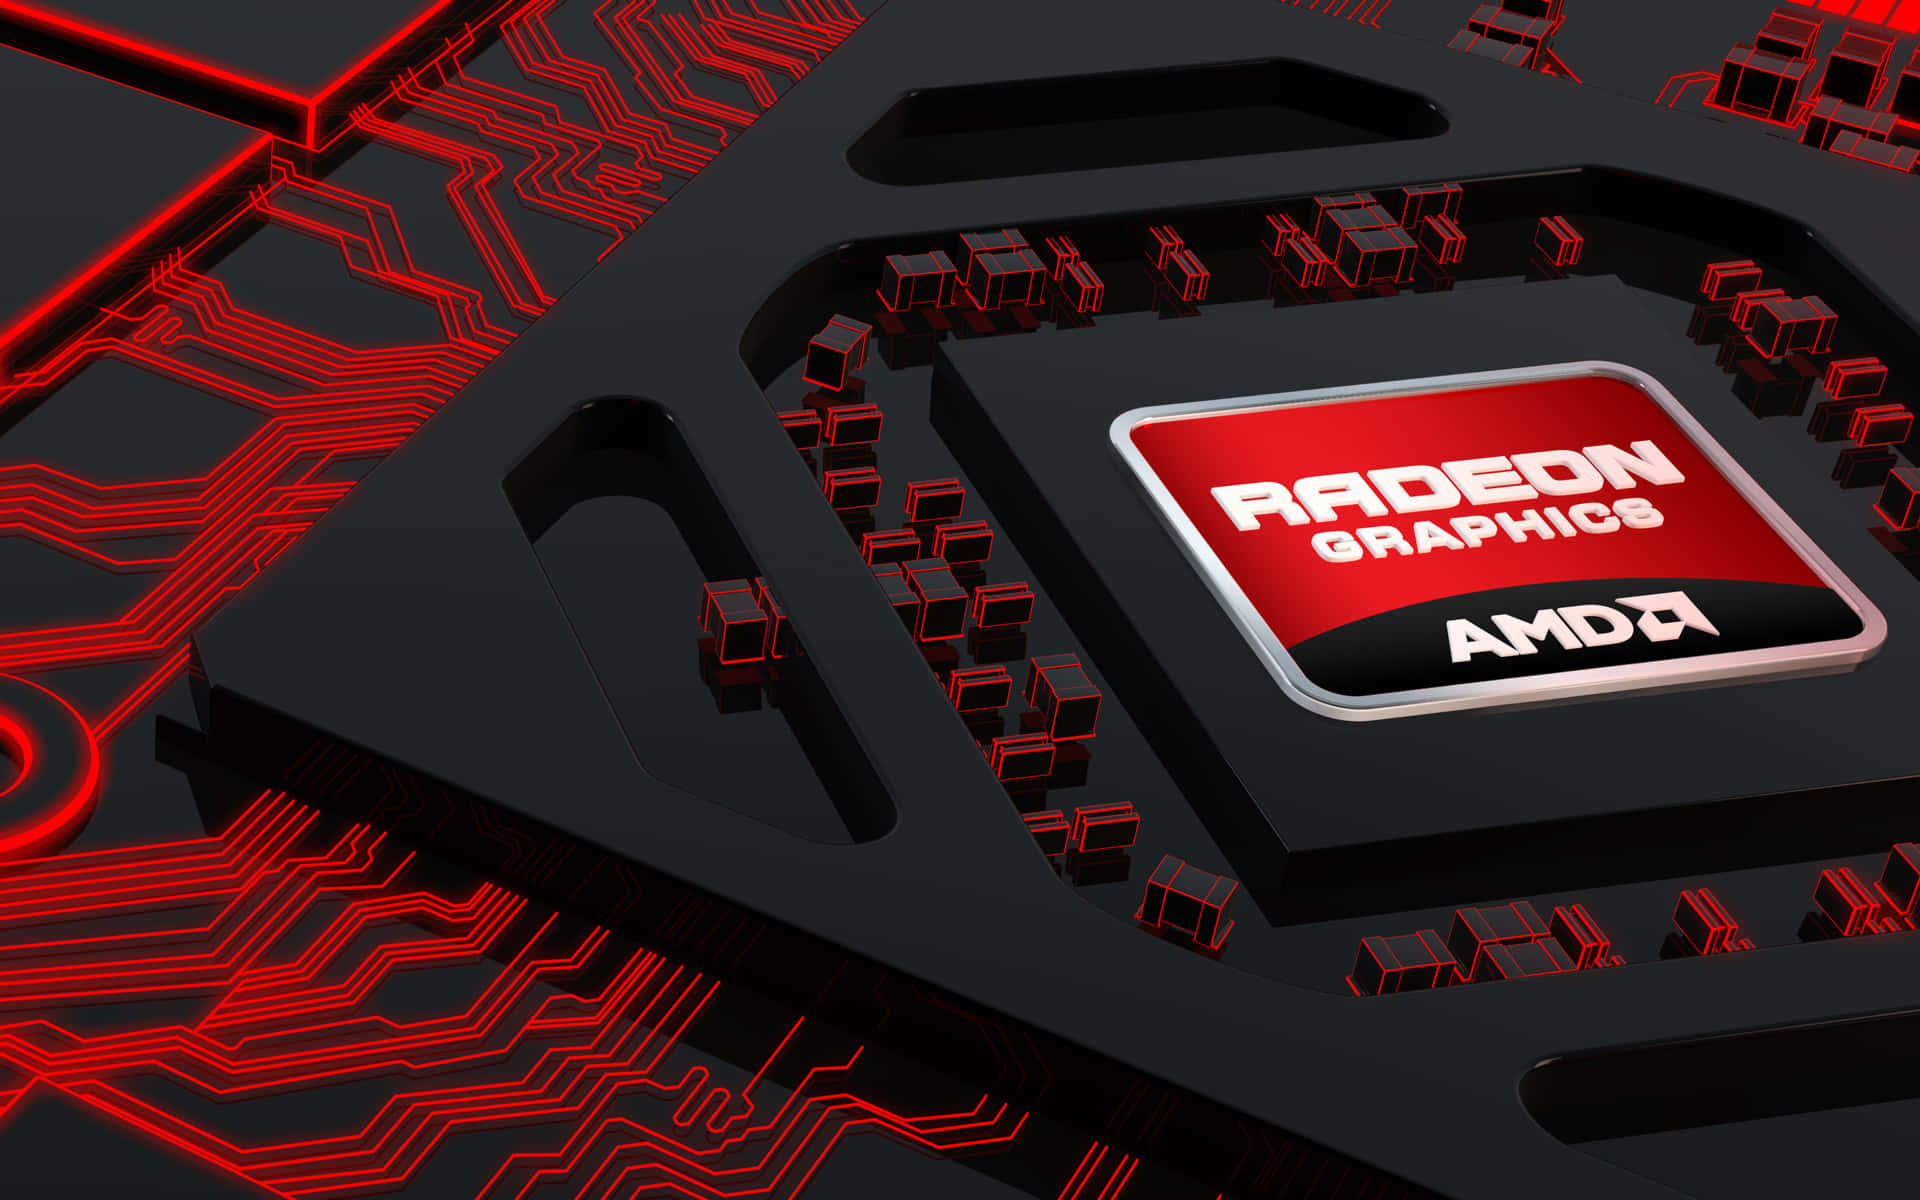 Get ready for a gaming experience like no other with Radeon Graphics Wallpaper